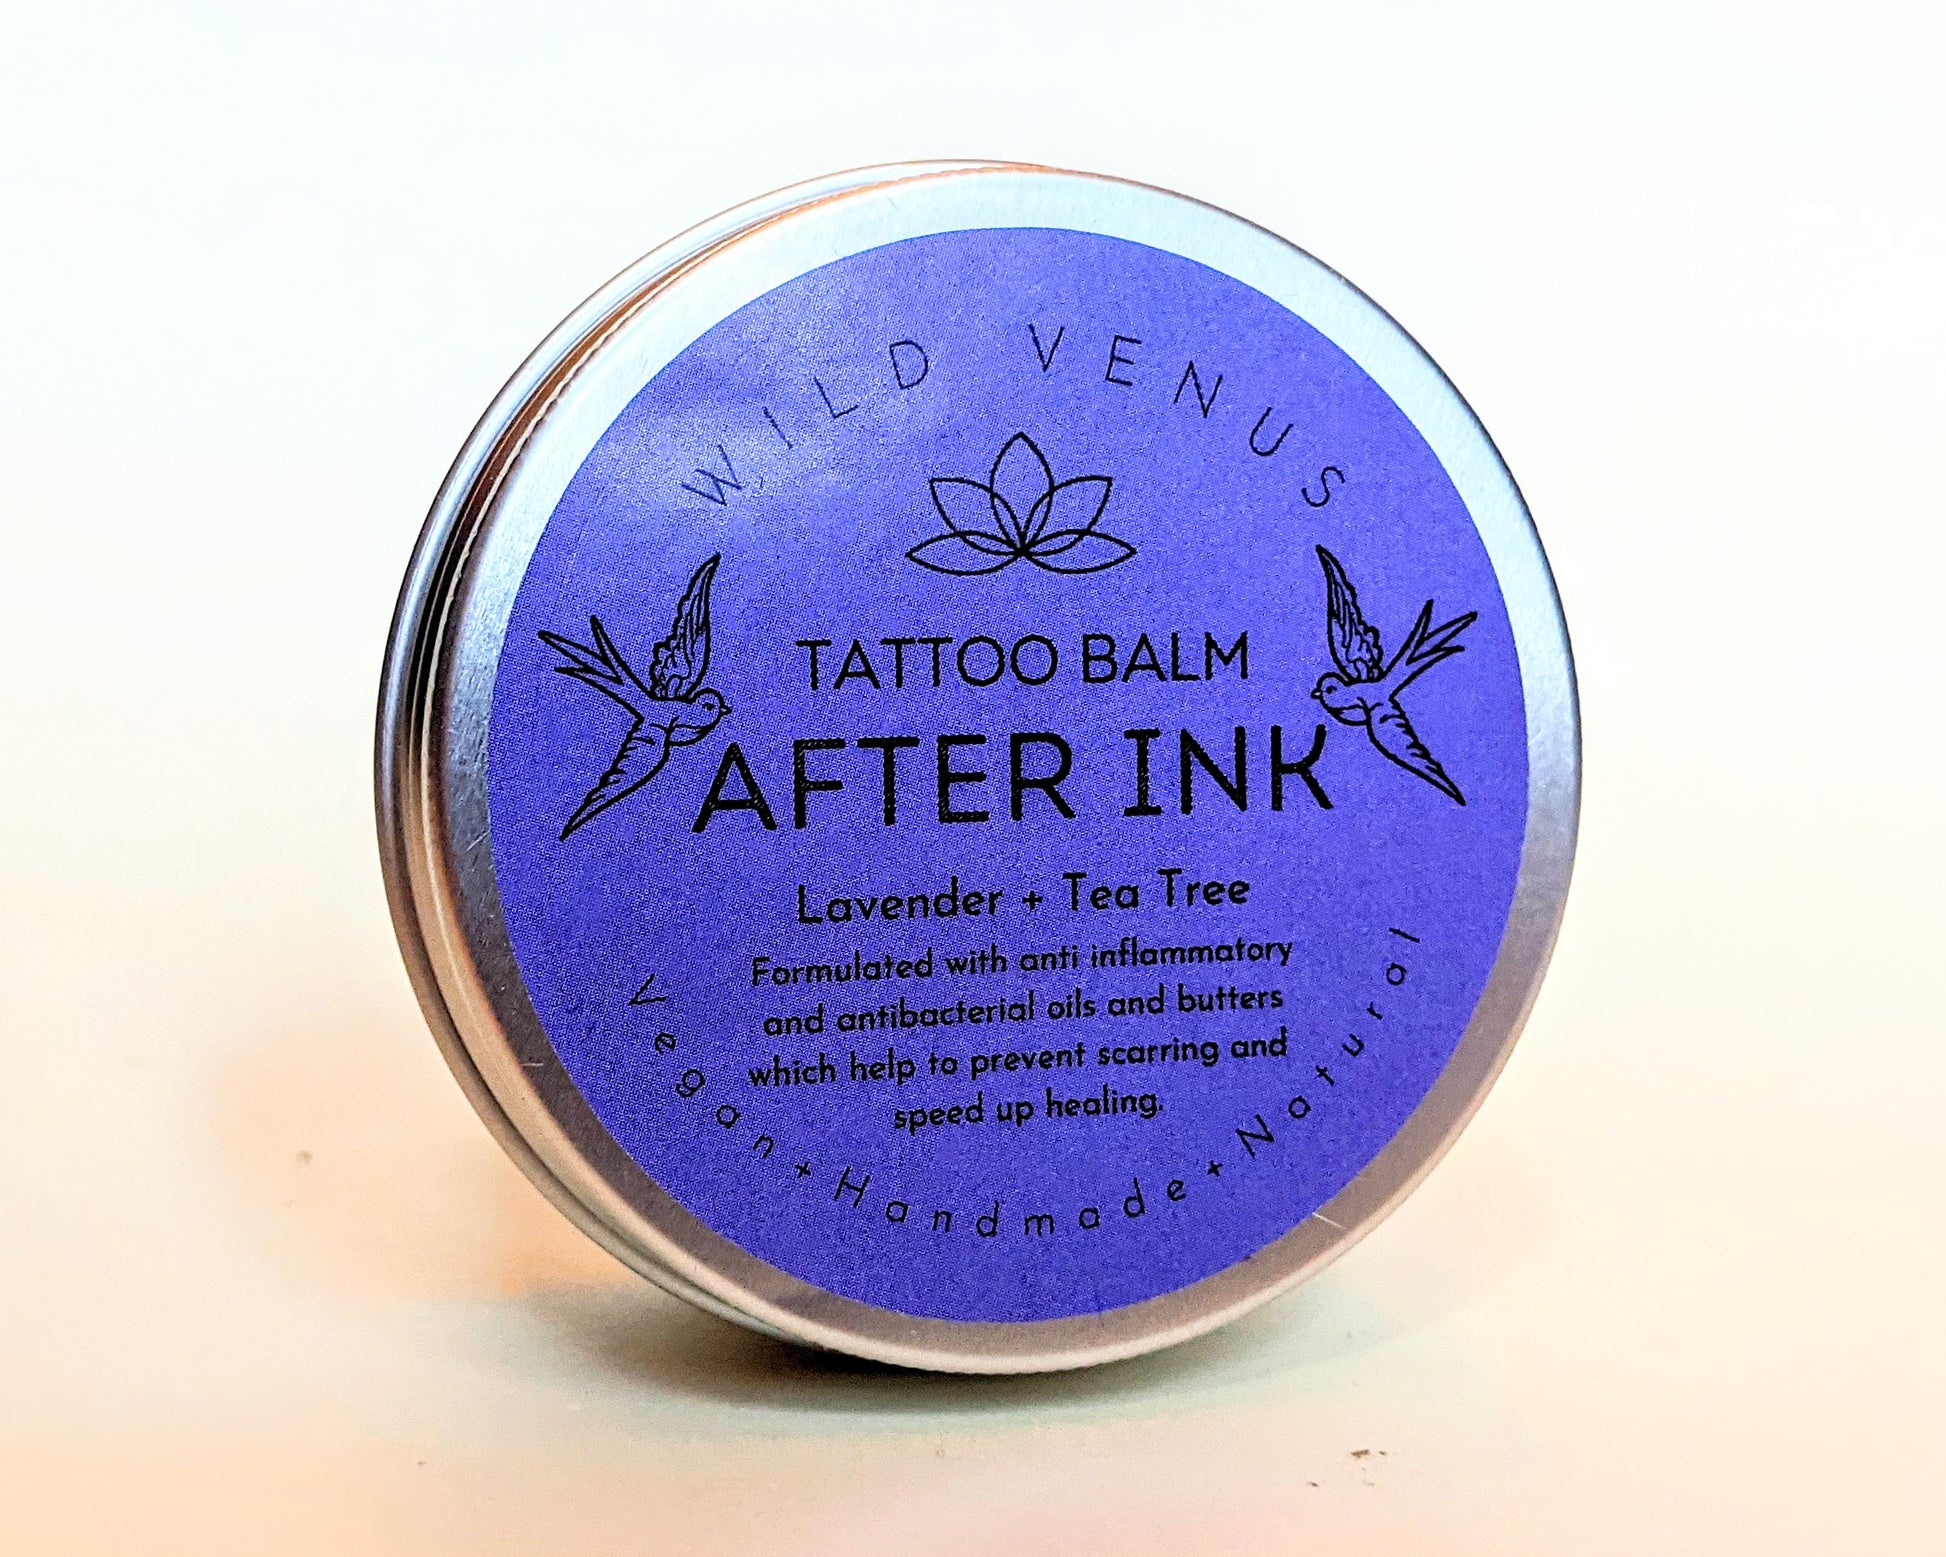 A tin of After Ink tattoo balm. 